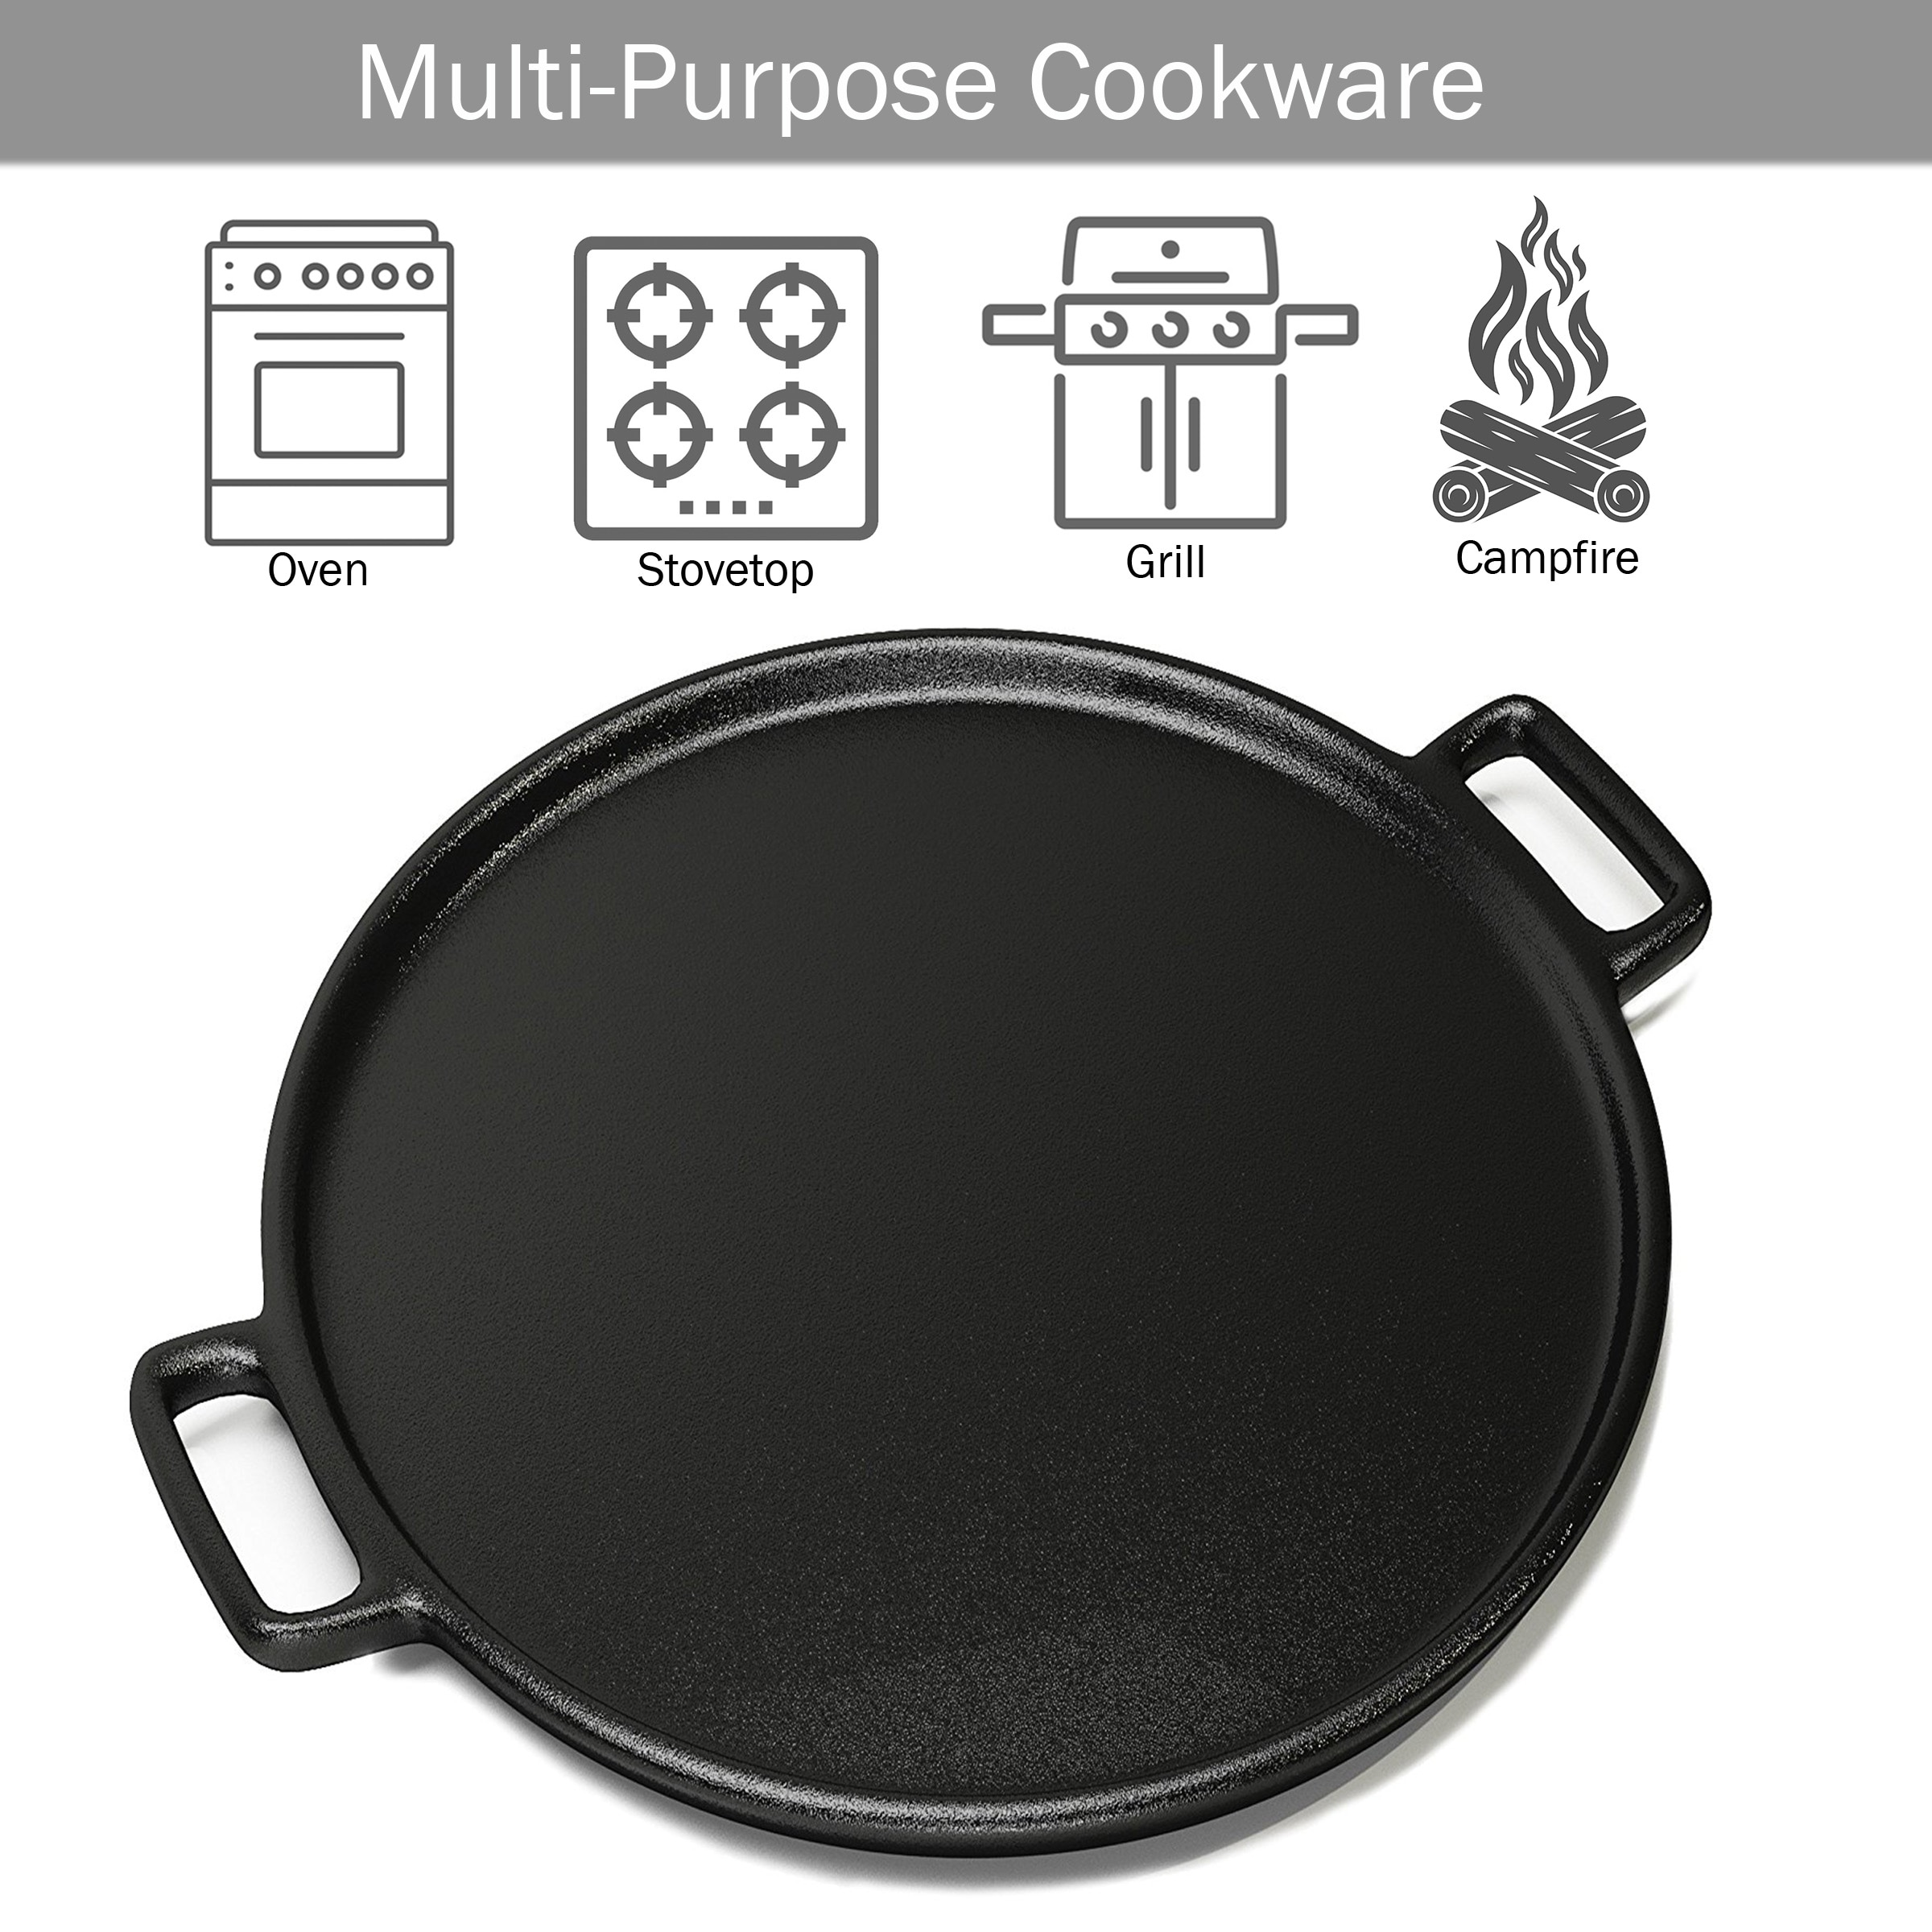 Hastings Home Cookware 14-in Cast Iron Skillet